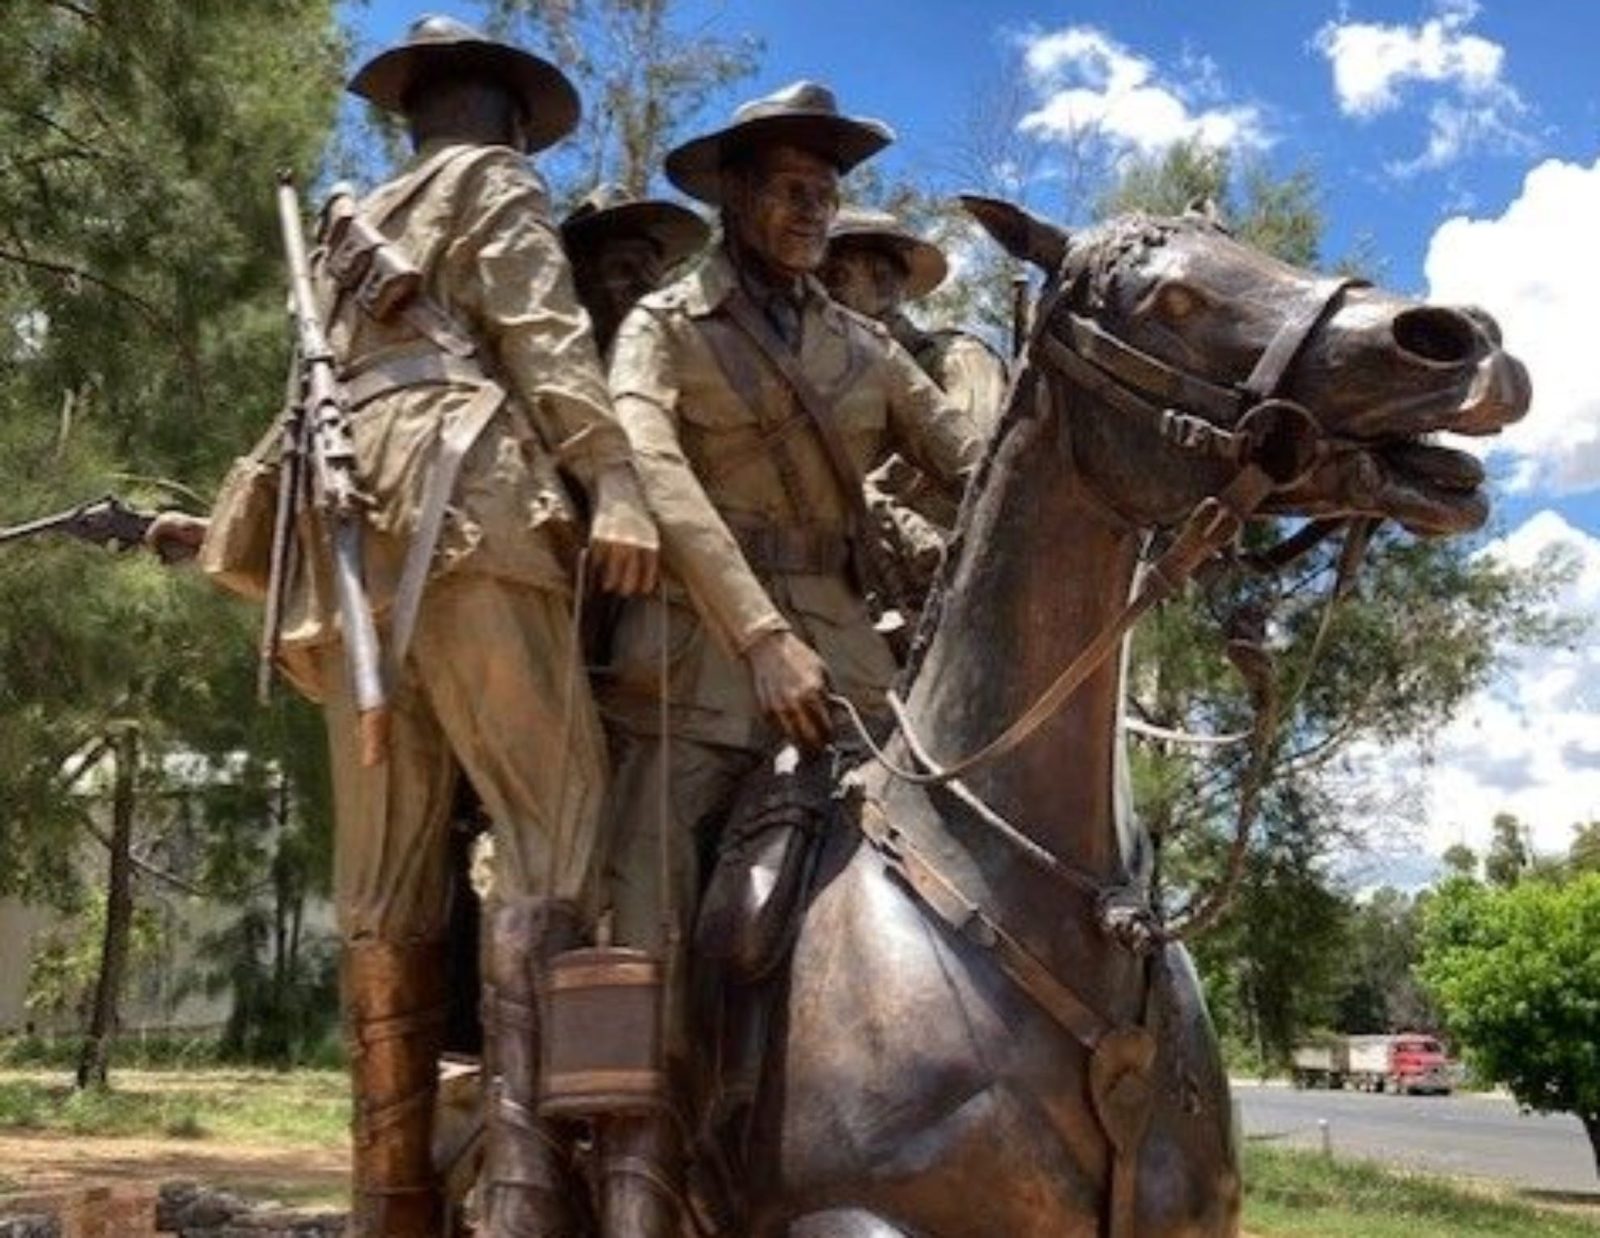 The epic feat of Australia's best known war horse features in a park at Harden-Murrumburah.